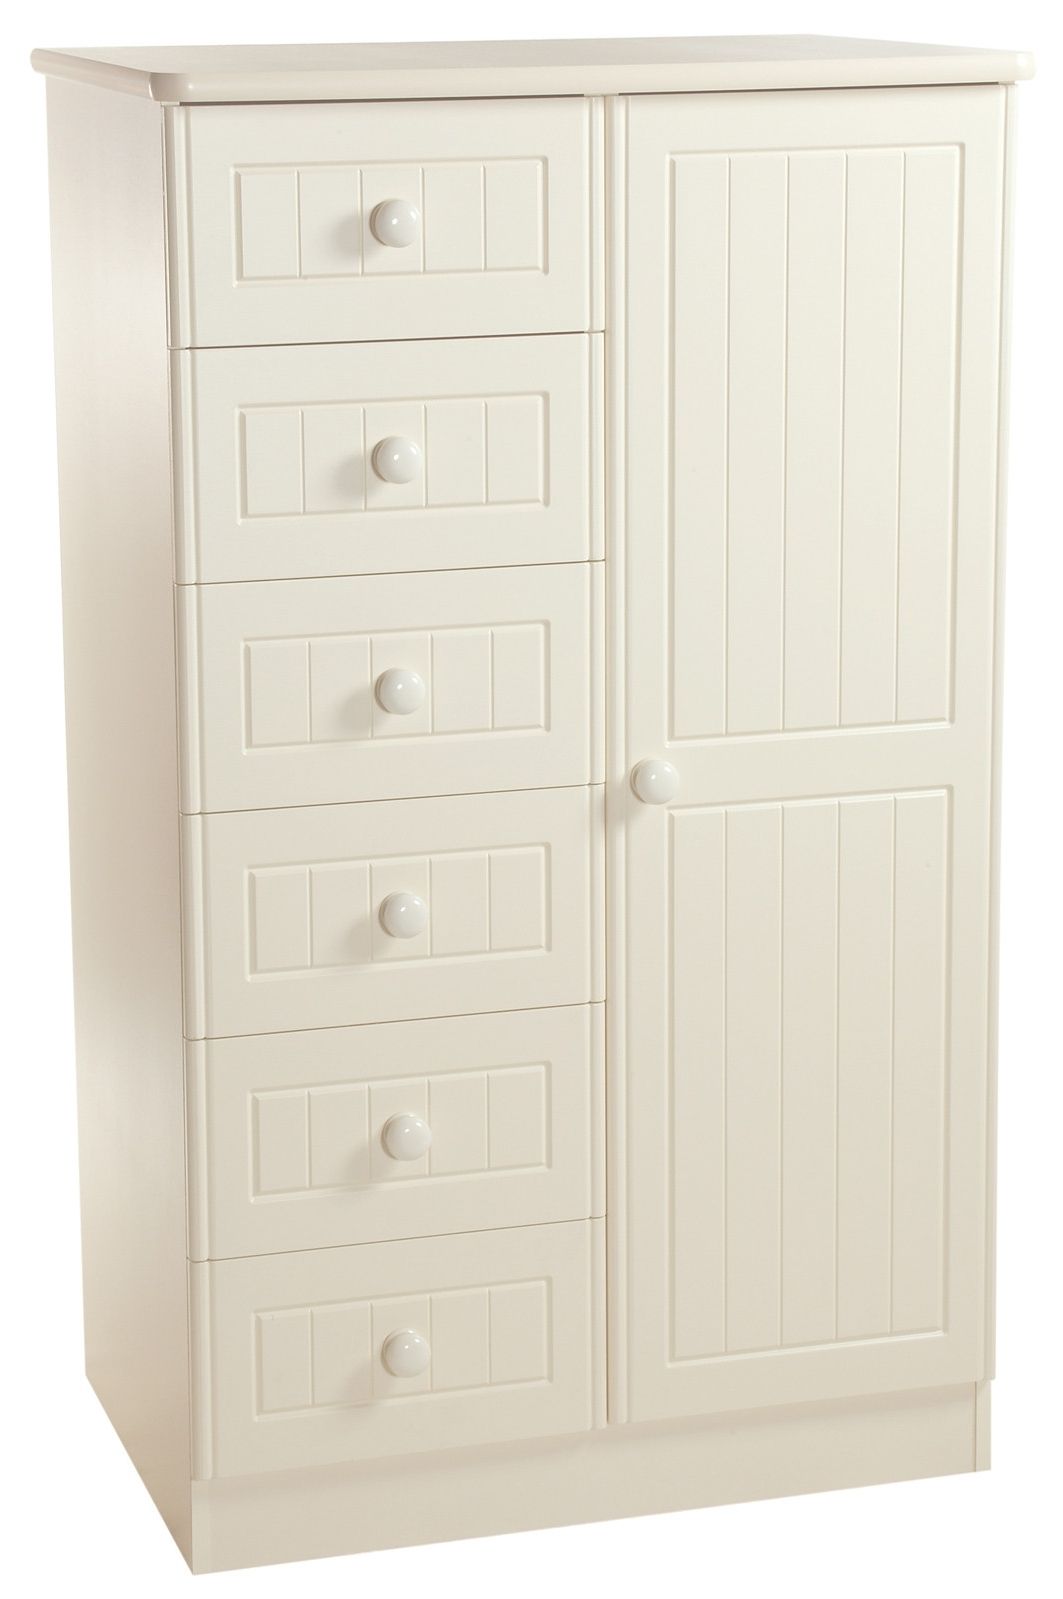 Best And Newest Avalon Cream Childrens Wardrobe – Default Store View Furniture Throughout White Wardrobes With Drawers (View 14 of 15)